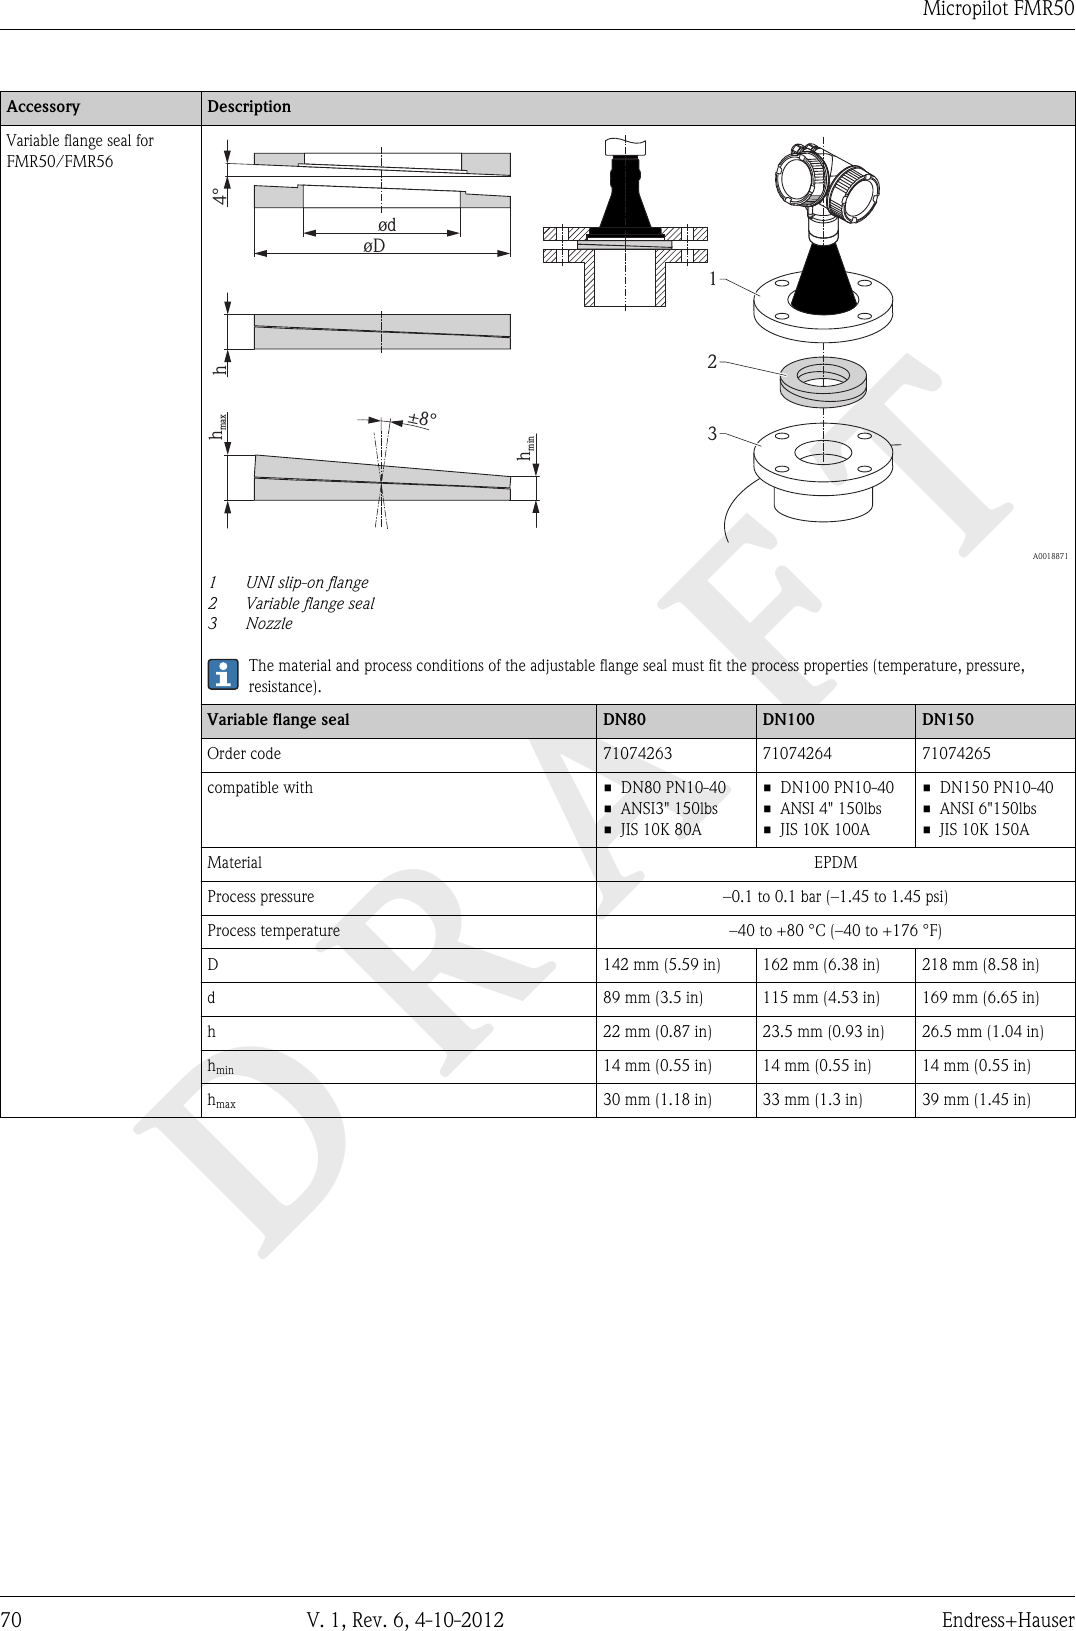 DRAFTMicropilot FMR5070 V. 1, Rev. 6, 4-10-2012 Endress+HauserAccessory DescriptionVariable flange seal forFMR50/FMR56h2314°øDødhmaxhmin±8°  A00188711UNI slip-on flange2 Variable flange seal3 NozzleThe material and process conditions of the adjustable flange seal must fit the process properties (temperature, pressure,resistance).Variable flange seal DN80 DN100 DN150Order code 71074263 71074264 71074265compatible with • DN80 PN10-40• ANSI3&quot; 150lbs• JIS 10K 80A• DN100 PN10-40• ANSI 4&quot; 150lbs• JIS 10K 100A• DN150 PN10-40• ANSI 6&quot;150lbs• JIS 10K 150AMaterial EPDMProcess pressure –0.1 to 0.1 bar (–1.45 to 1.45 psi)Process temperature –40 to +80 °C (–40 to +176 °F)D 142 mm (5.59 in) 162 mm (6.38 in) 218 mm (8.58 in)d 89 mm (3.5 in) 115 mm (4.53 in) 169 mm (6.65 in)h 22 mm (0.87 in) 23.5 mm (0.93 in) 26.5 mm (1.04 in)hmin 14 mm (0.55 in) 14 mm (0.55 in) 14 mm (0.55 in)hmax 30 mm (1.18 in) 33 mm (1.3 in) 39 mm (1.45 in)